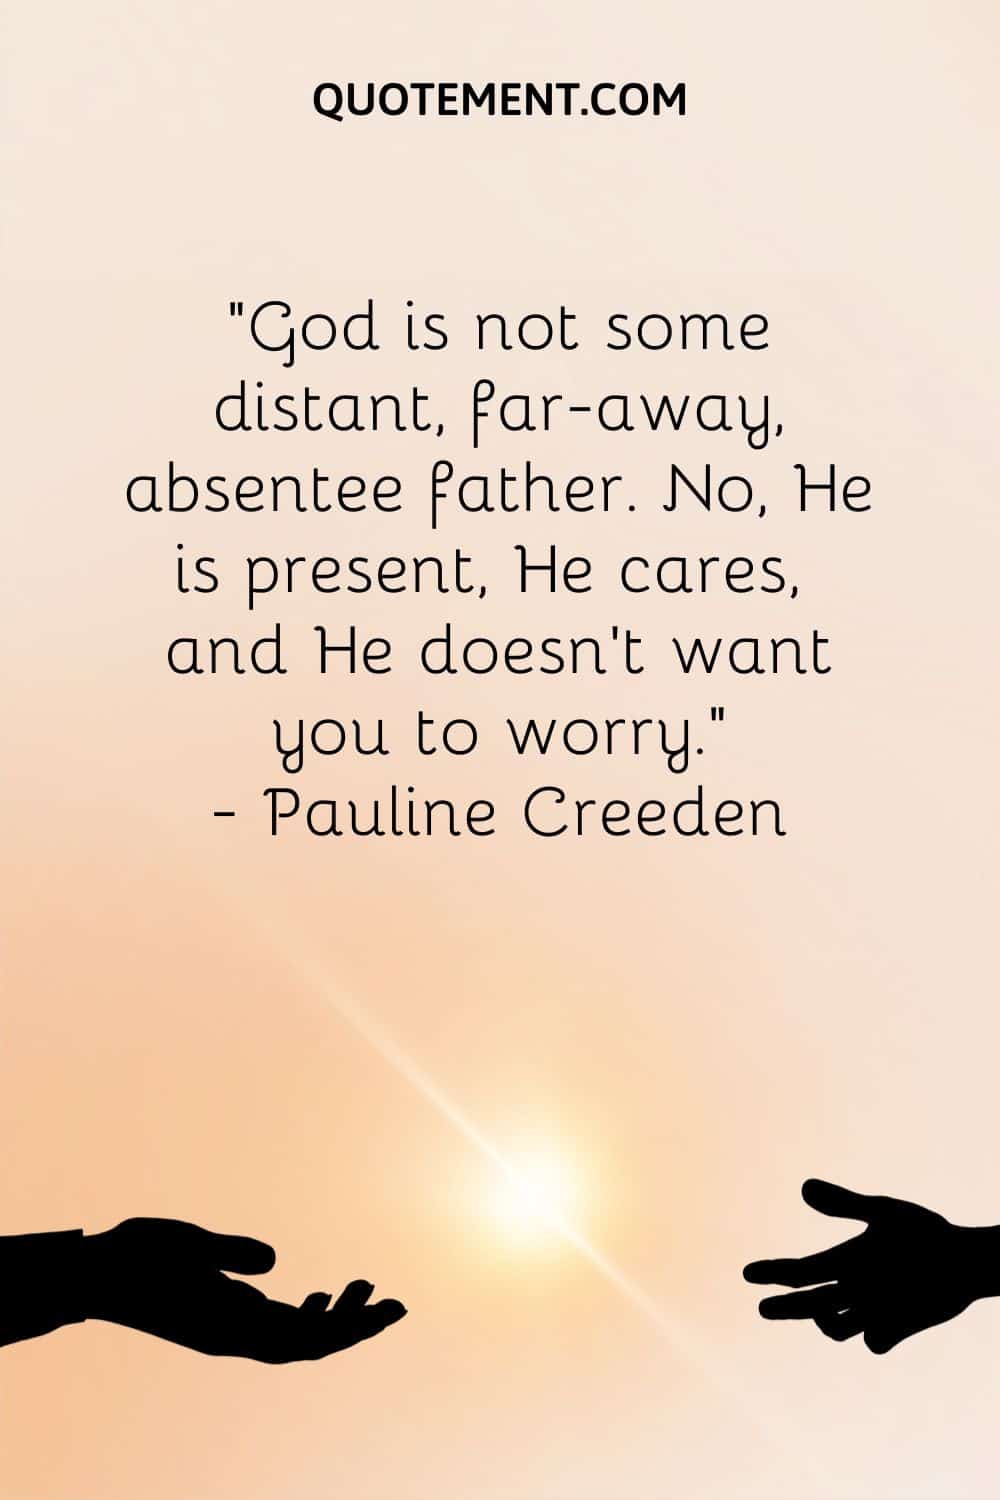 “God is not some distant, far-away, absentee father. No, He is present, He cares, and He doesn’t want you to worry.” — Pauline Creeden